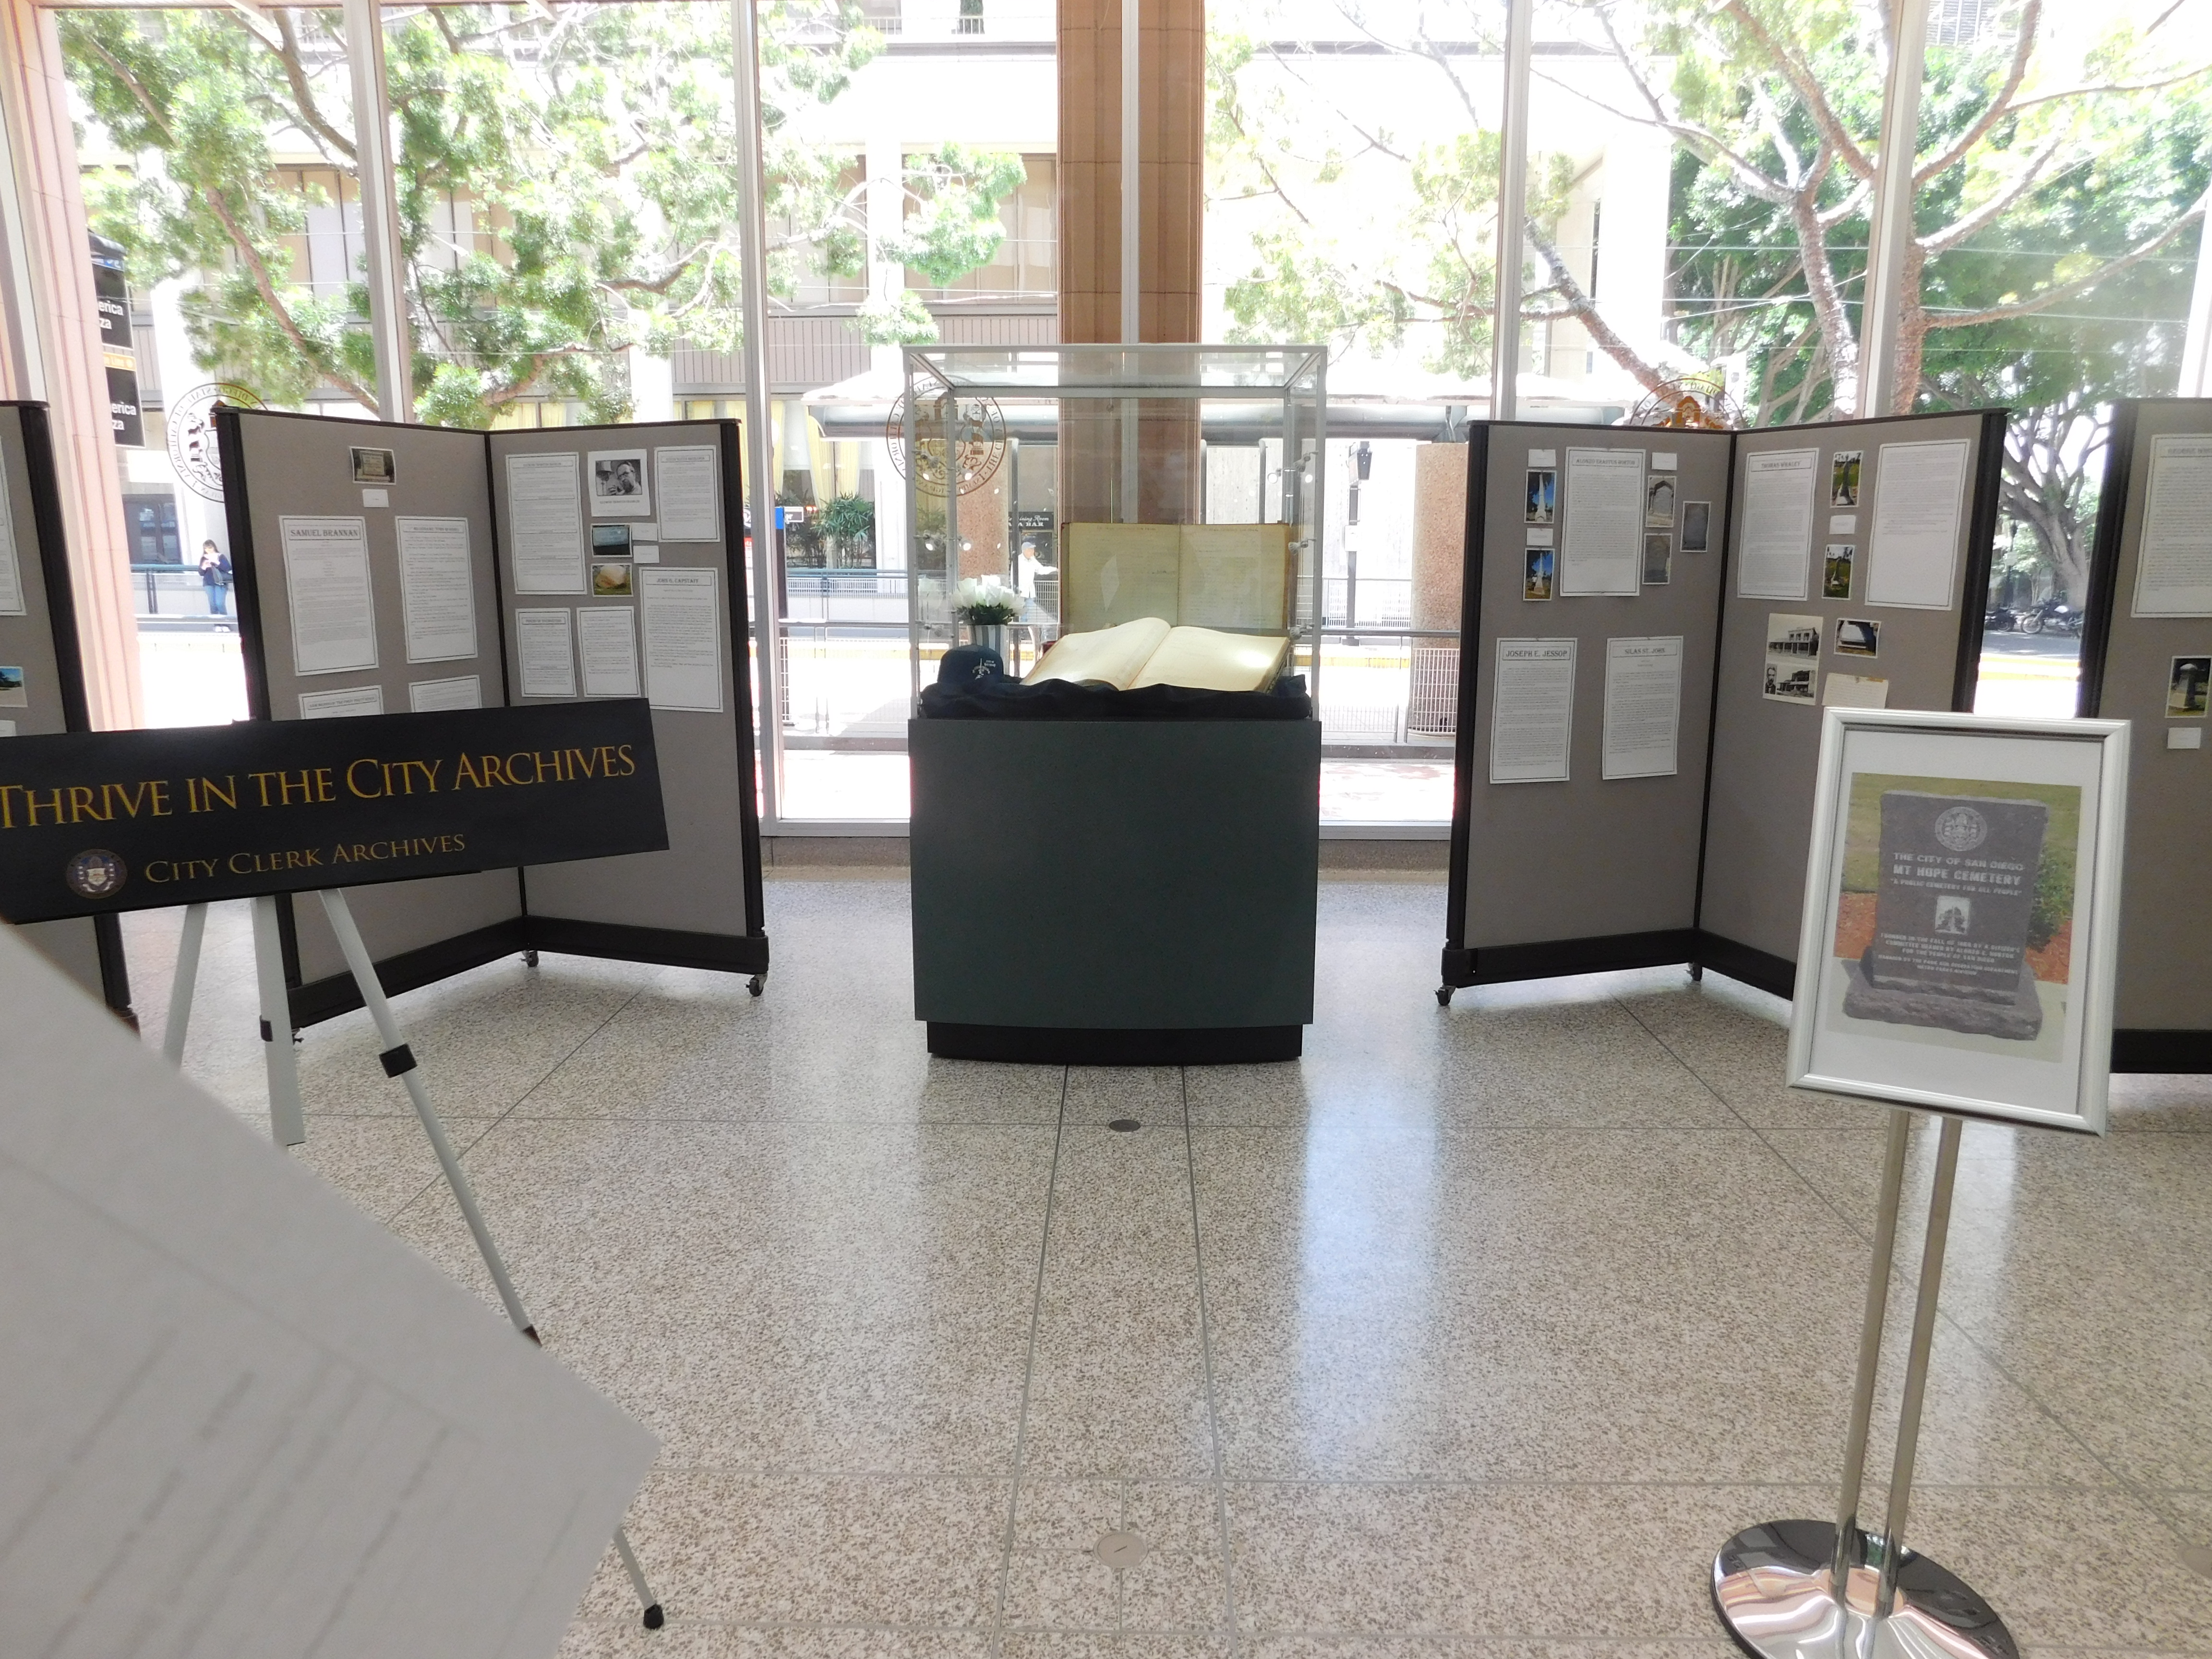 The completed display in  the City Administration Building featuring the historical cemetery Mount Hope